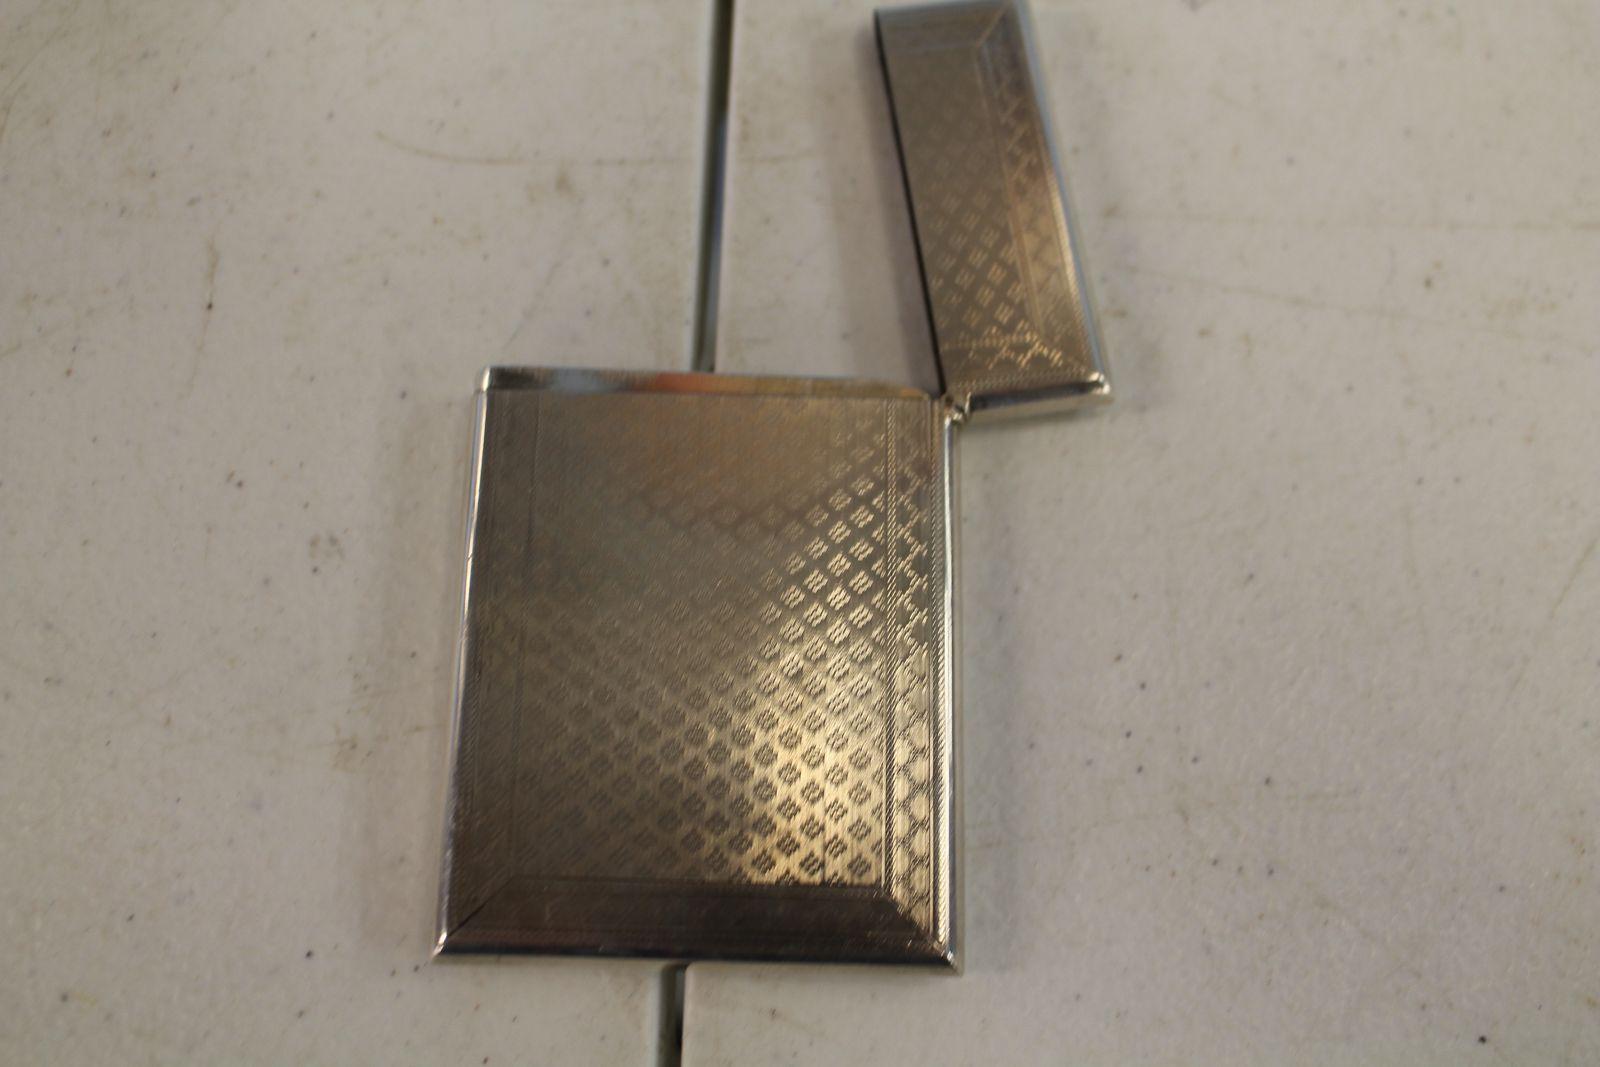 CIGARETTE and CARD HOLDERS